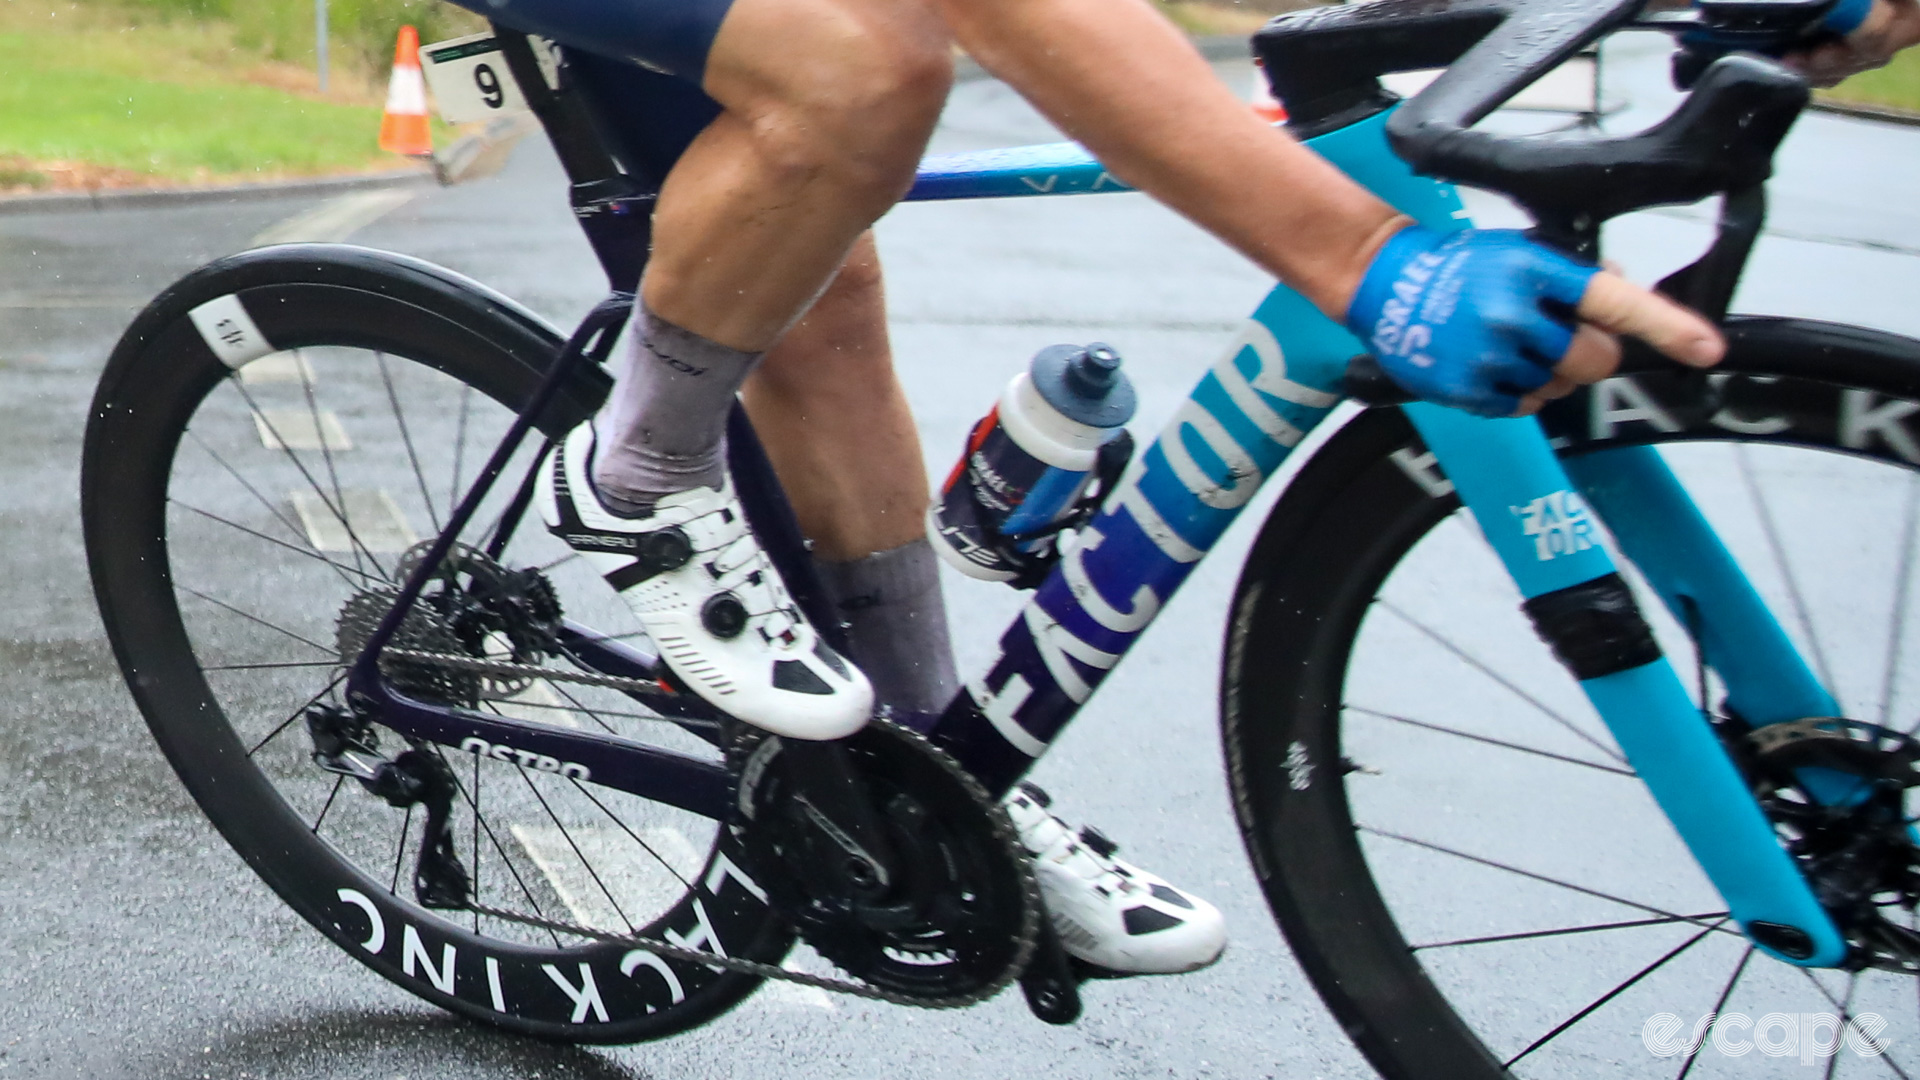 The photo shows Simon Clarke's new Factor Ostro spotted at the Australian road race national championships.